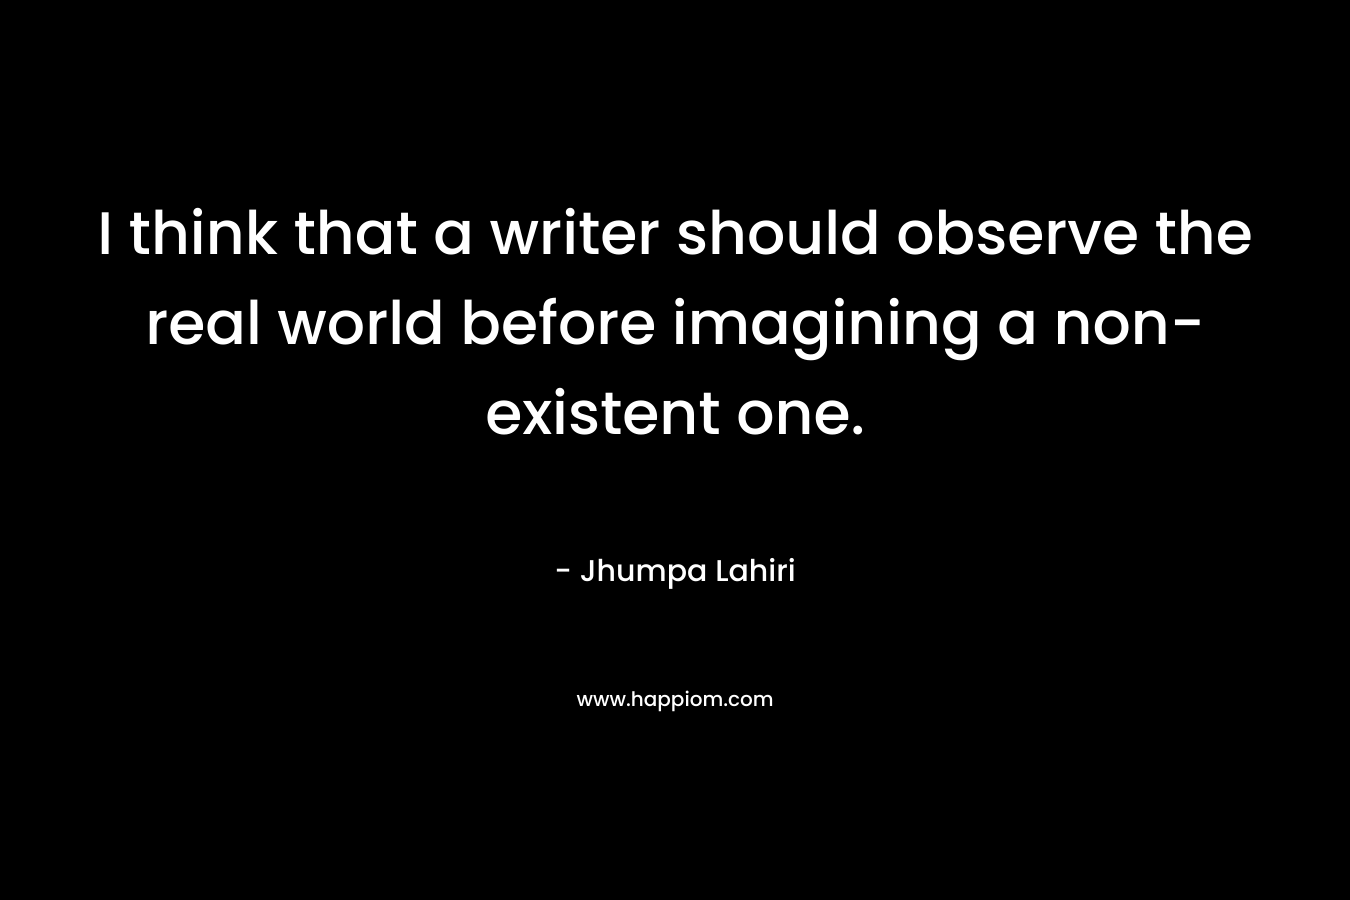 I think that a writer should observe the real world before imagining a non-existent one.